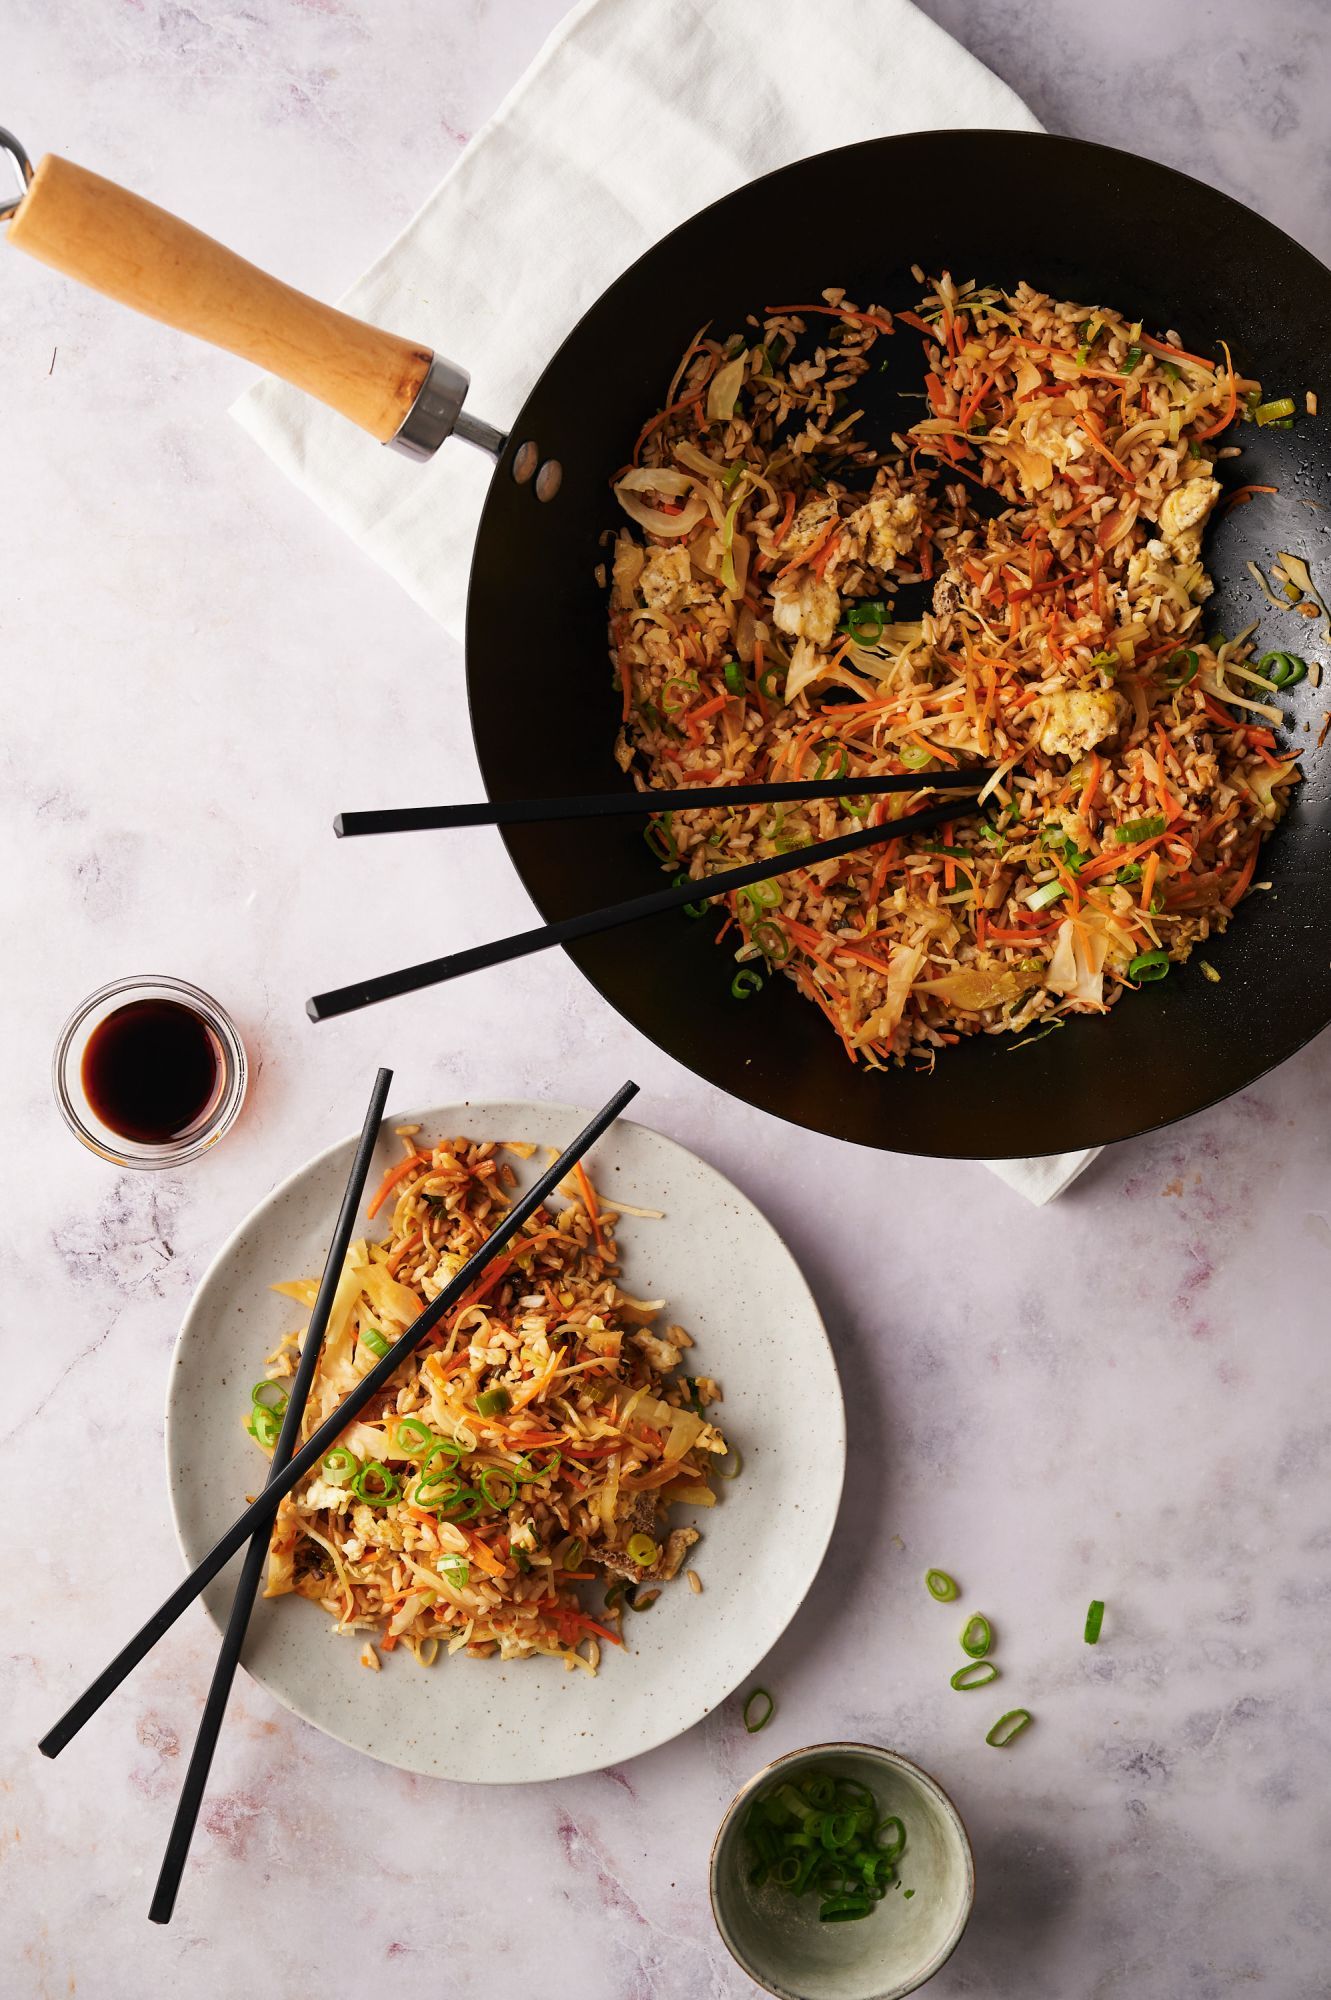 Healthy Asian fried rice with carrots, cabbage, green onions, eggs, and brown rice in a wok and served on a plate.